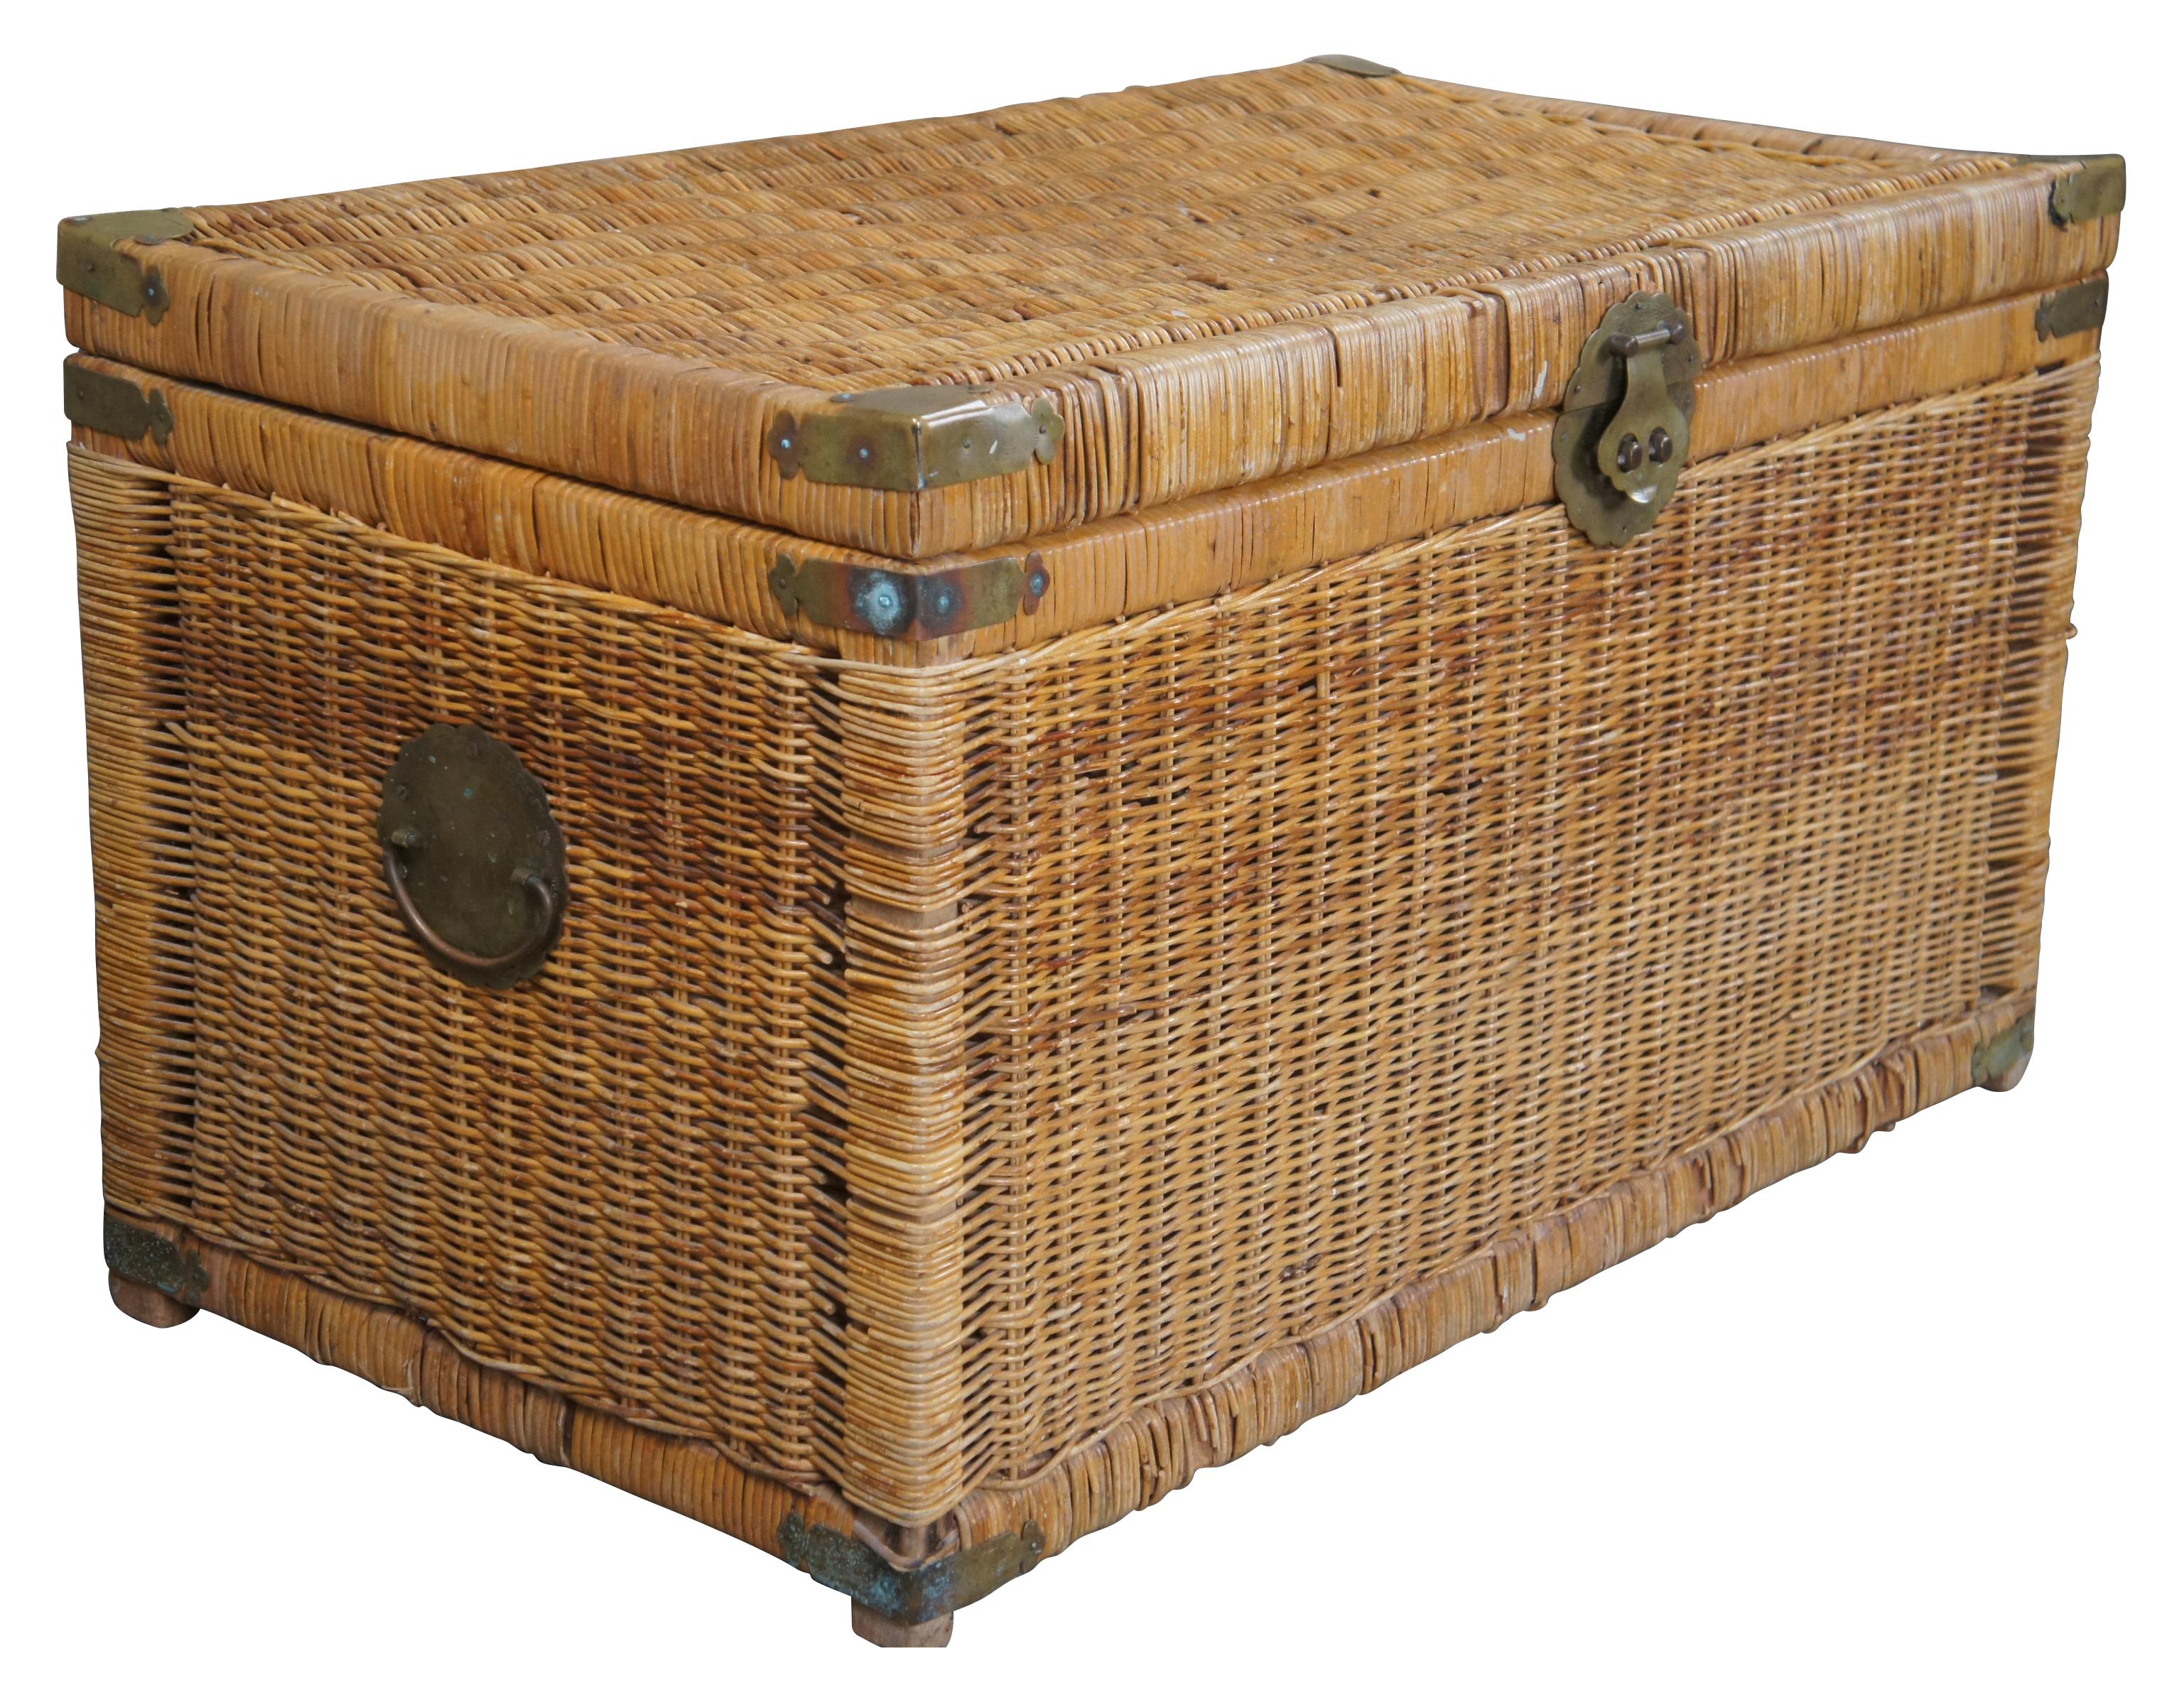 A vintage hand-woven Asian wicker rattan storage chest, 1970s. Ming inspired scalloped brass hardware depicts engraved birds and geometric oriental motifs and symbols.